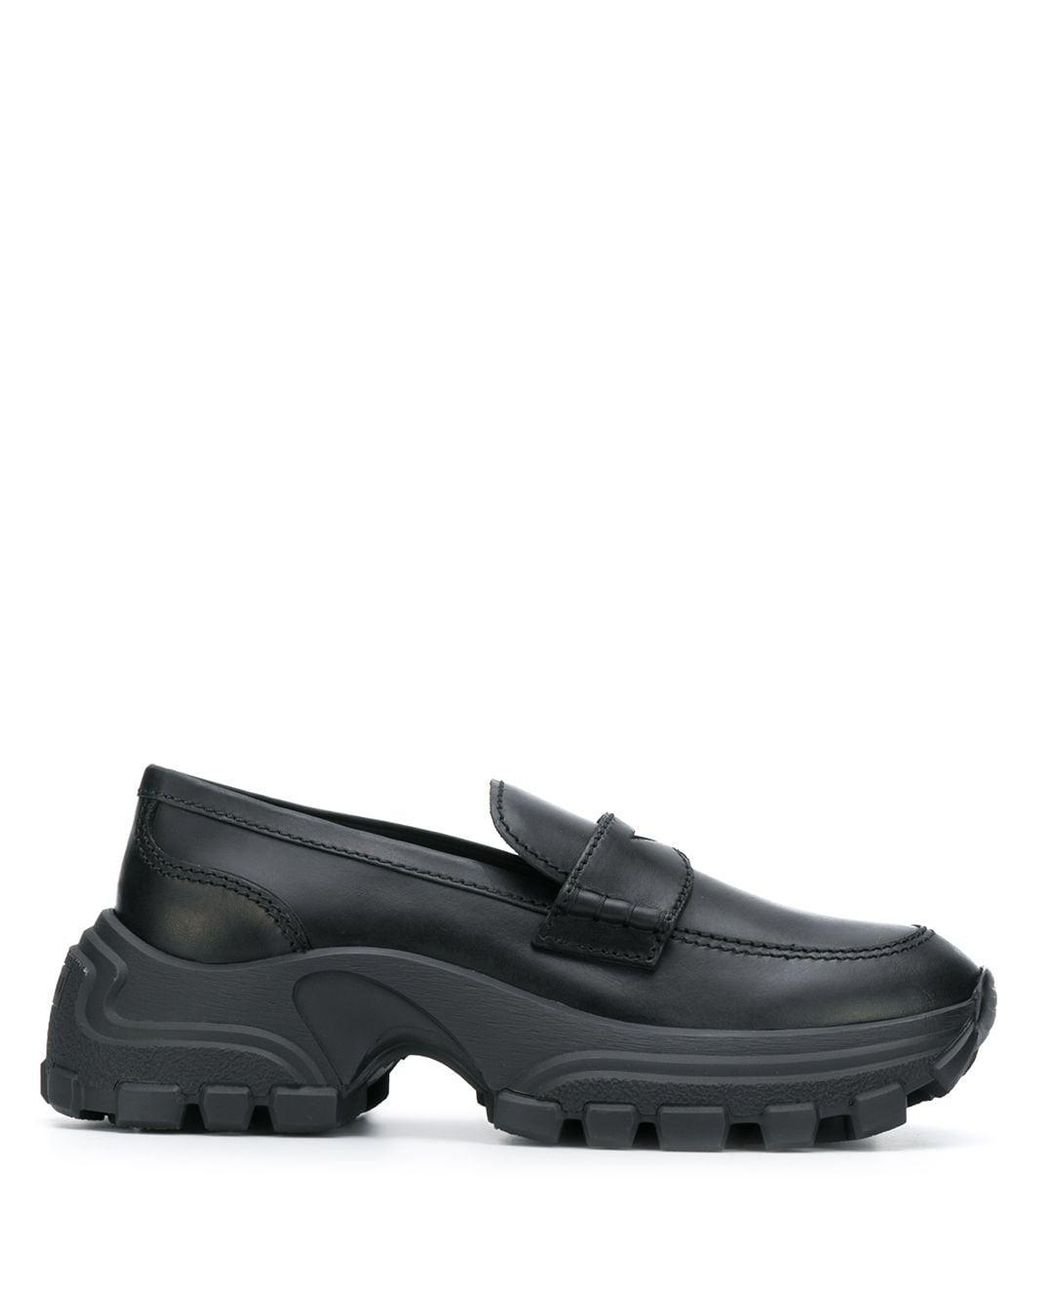 Miu Miu Leather Chunky Sole Penny Loafers in Nero (Black) - Save 68% - Lyst